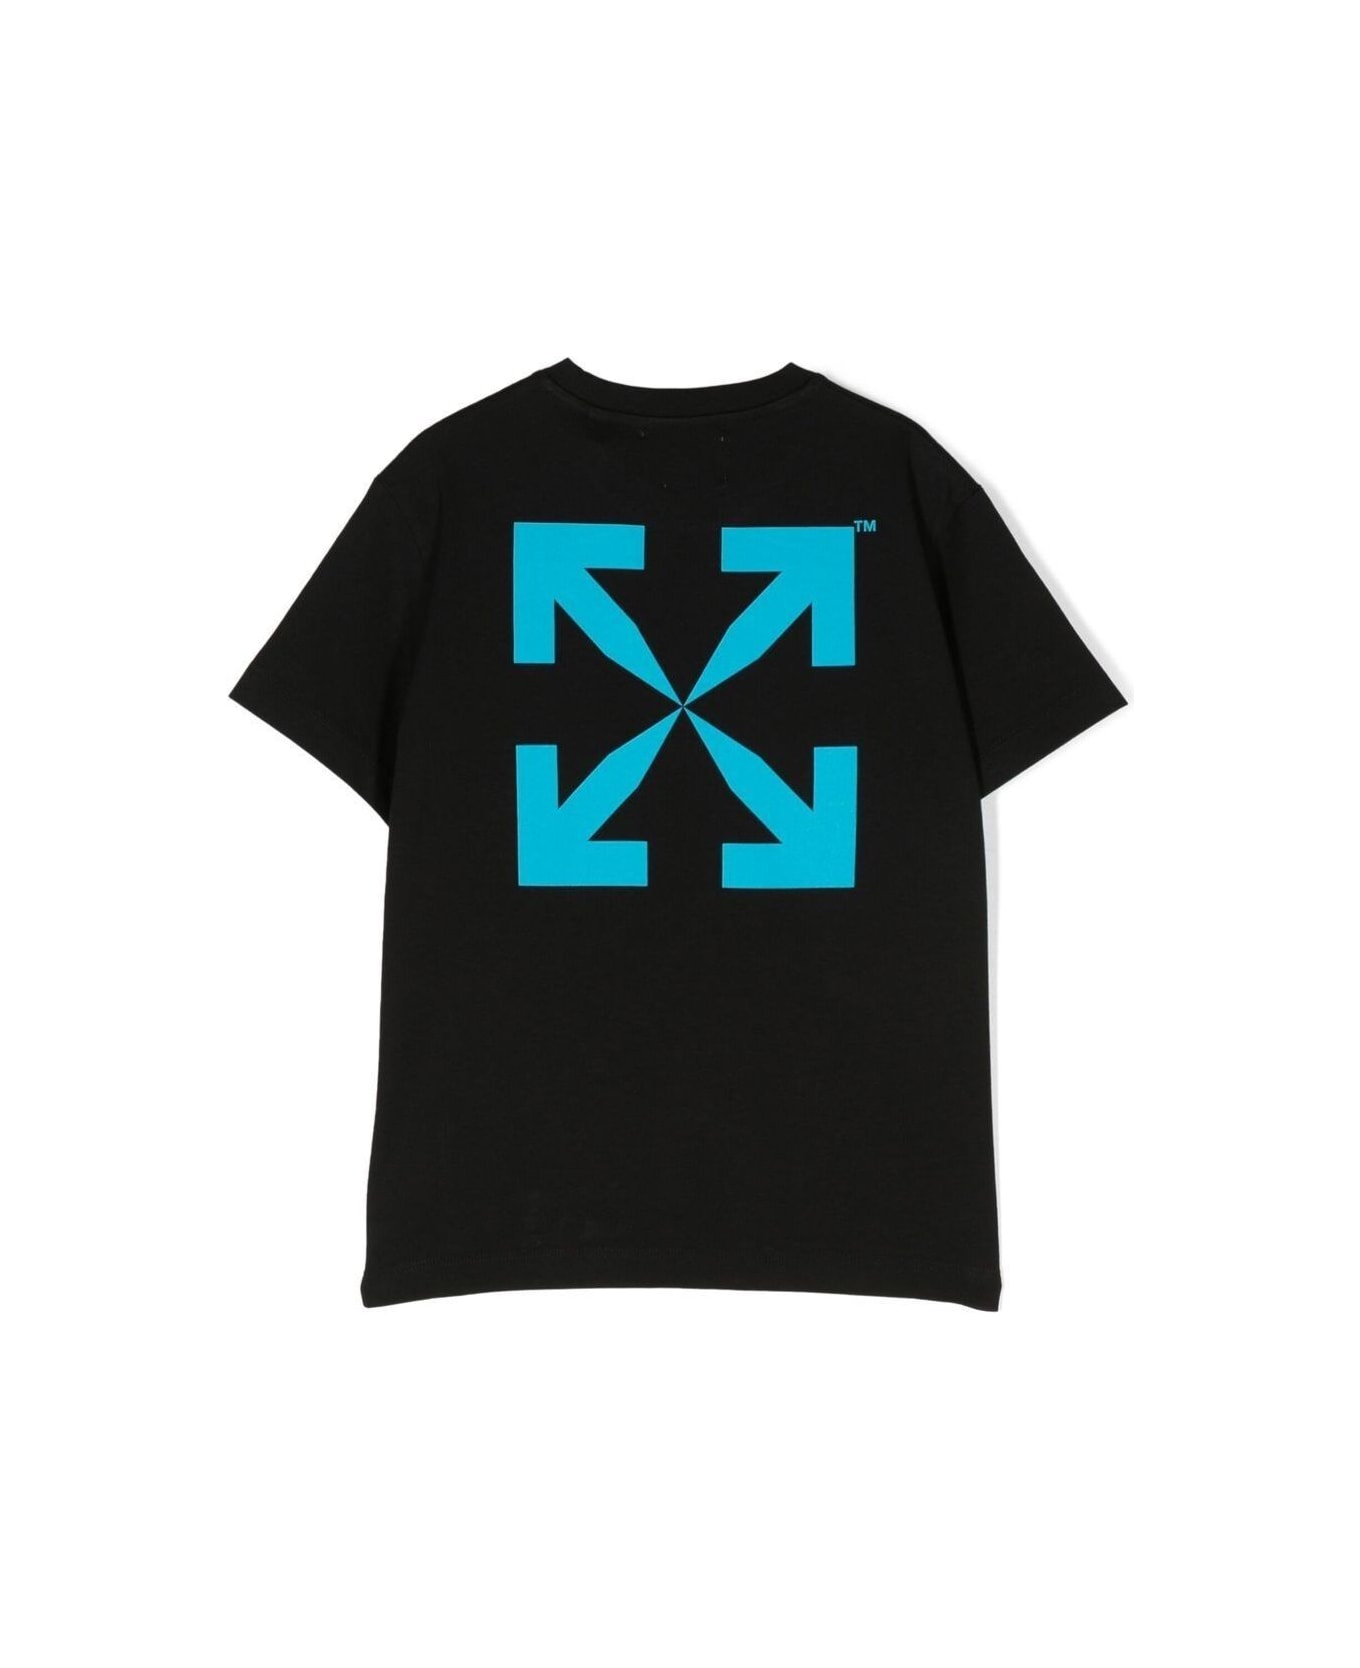 Off-White Crewneck T-shirt With Graphic Print And Arrow-logo In Black Cotton Boy - Black